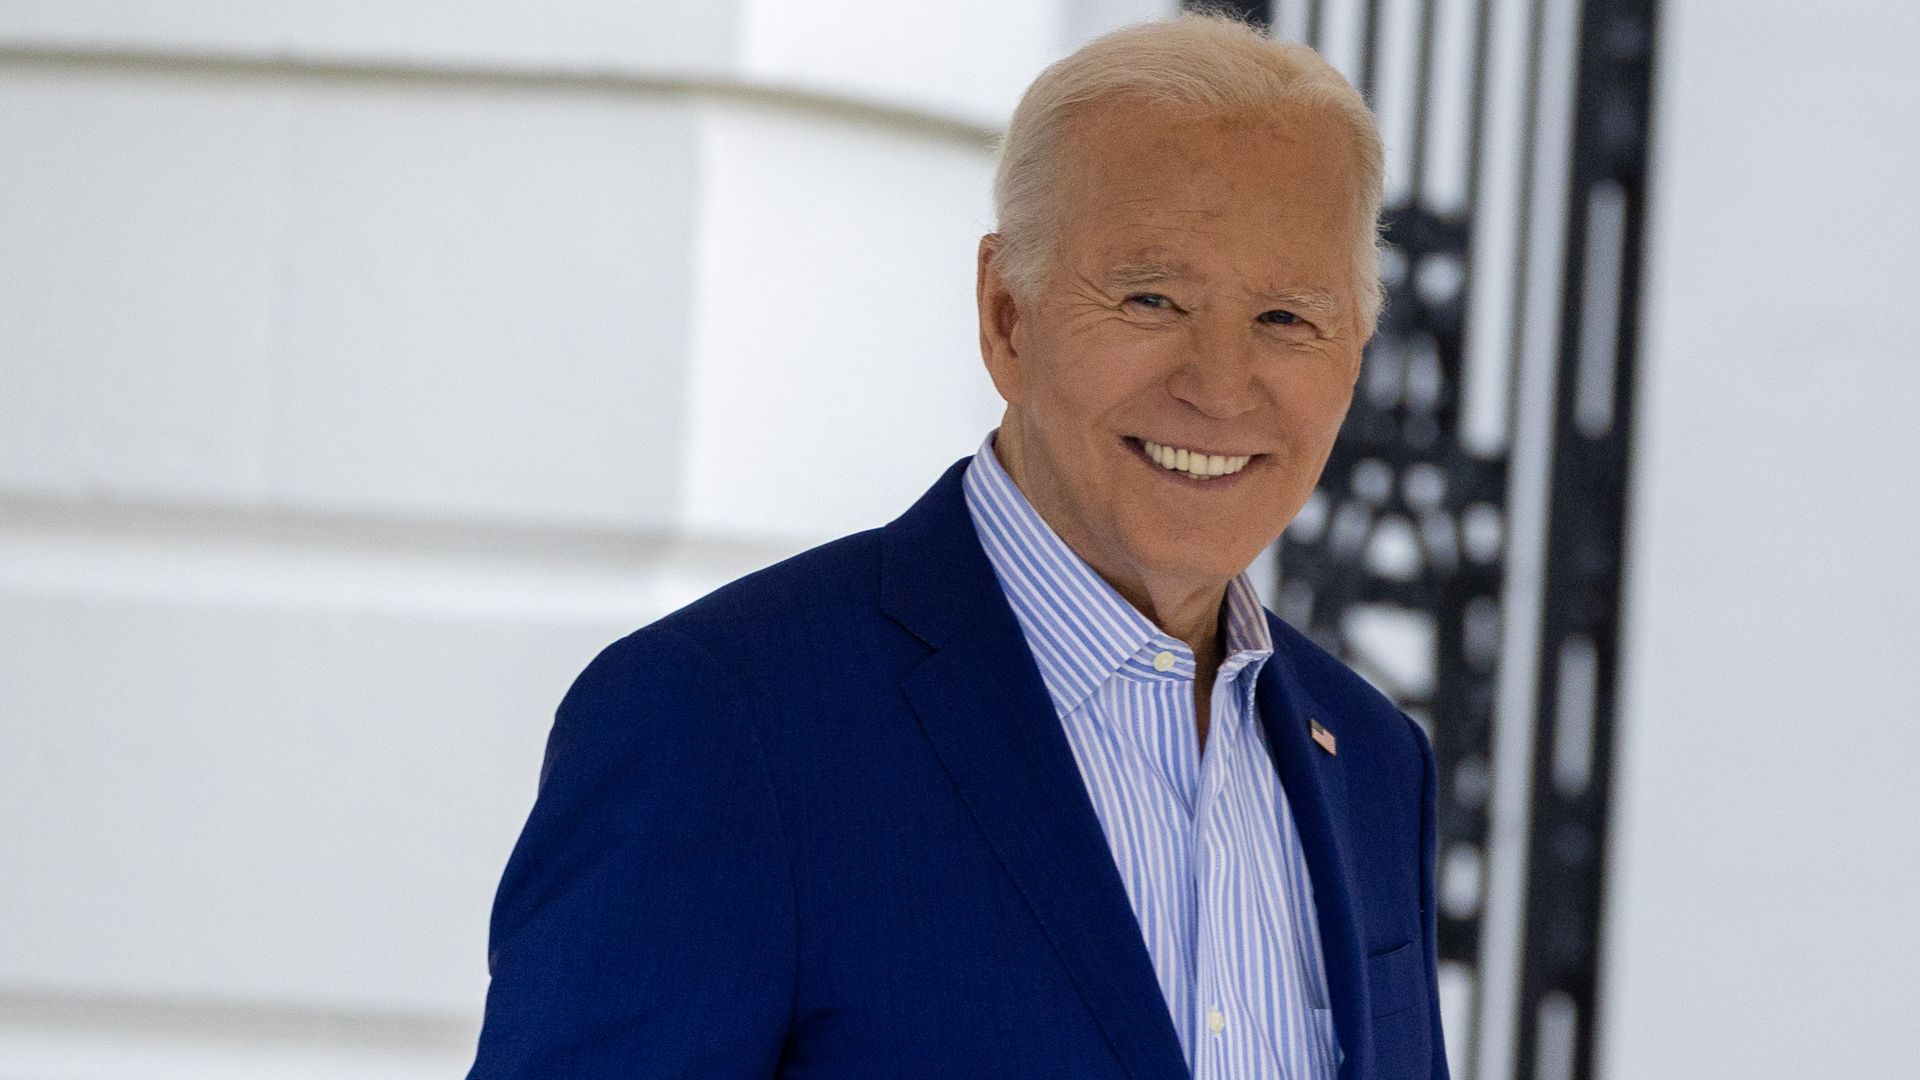 Joe Biden, wearing a blue jacket and a blue and white stripped shirt, smiles as he leaves the White House.